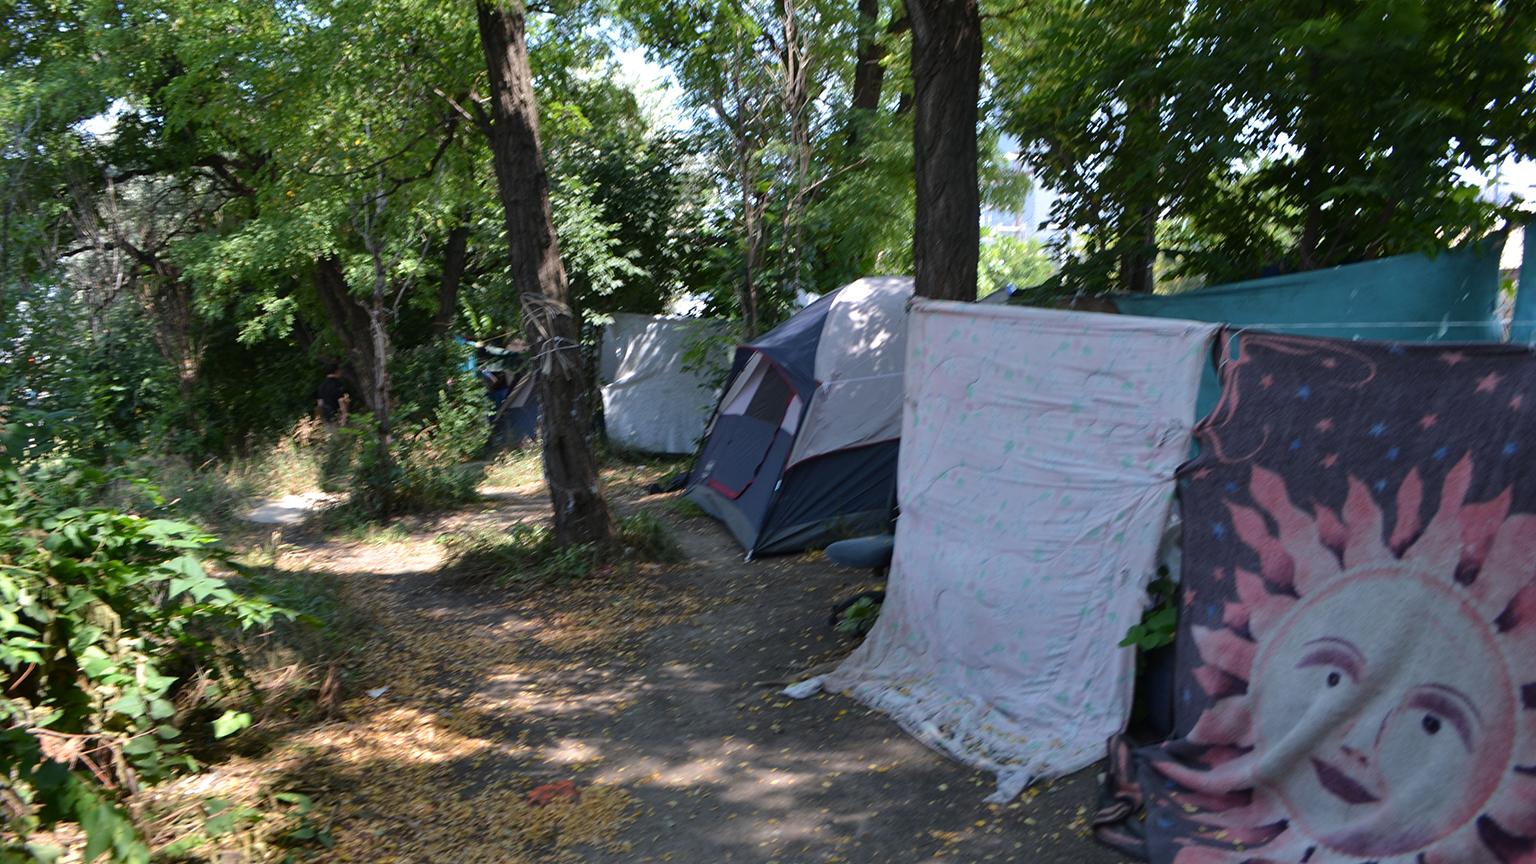 Tents set up in a homeless encampment along DesPlaines Street north of Roosevelt Road. (Kristen Thometz / Chicago Tonight)